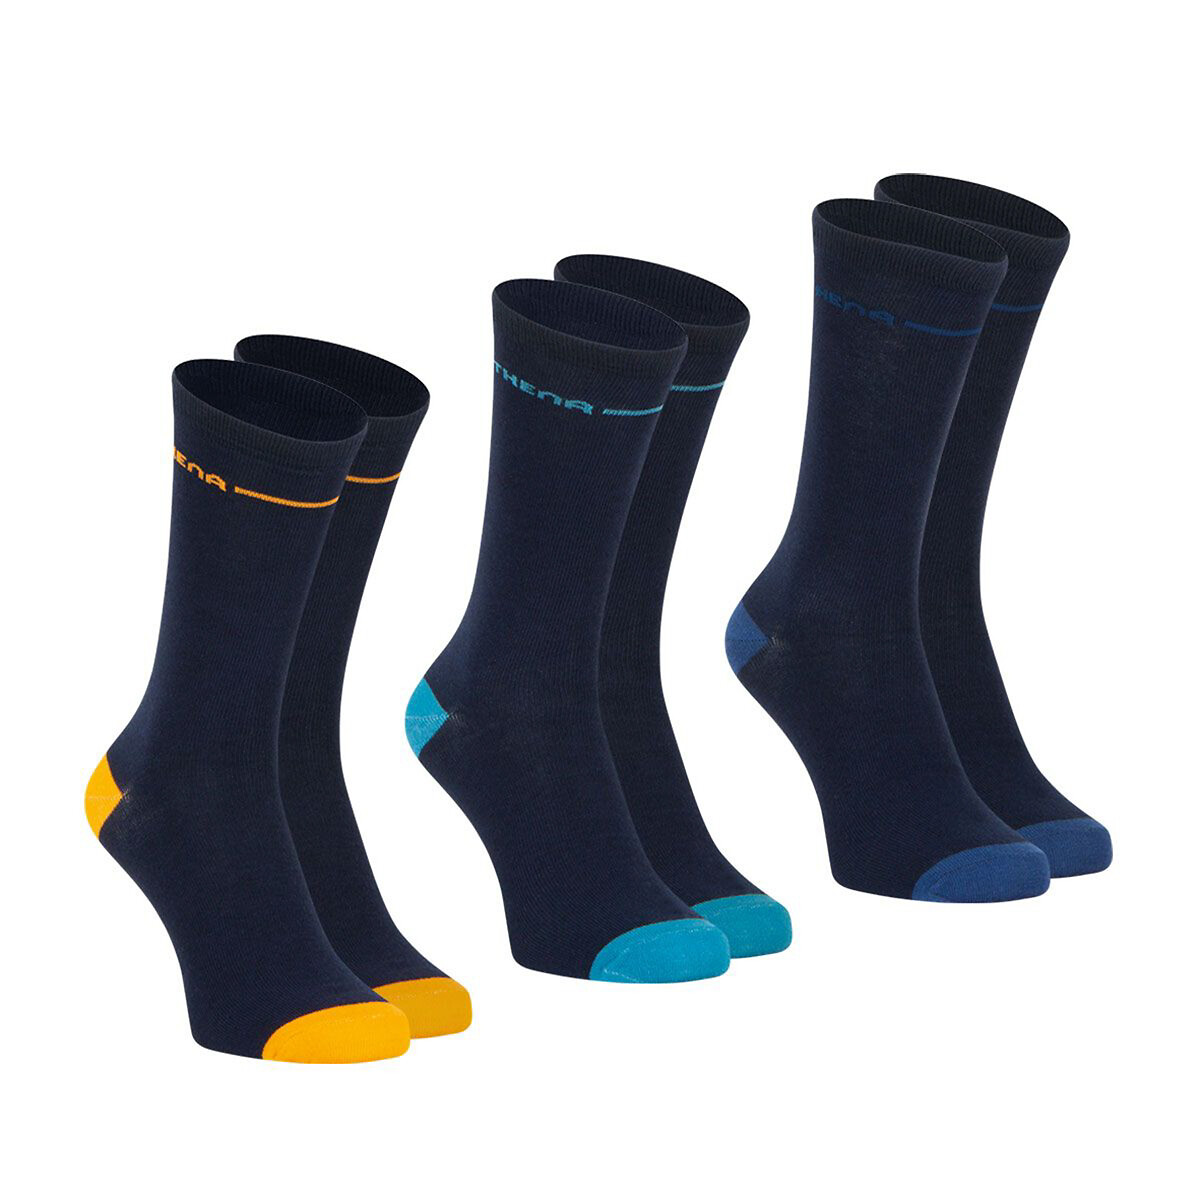 Pack of 3 Pairs of LM50 Crew Socks